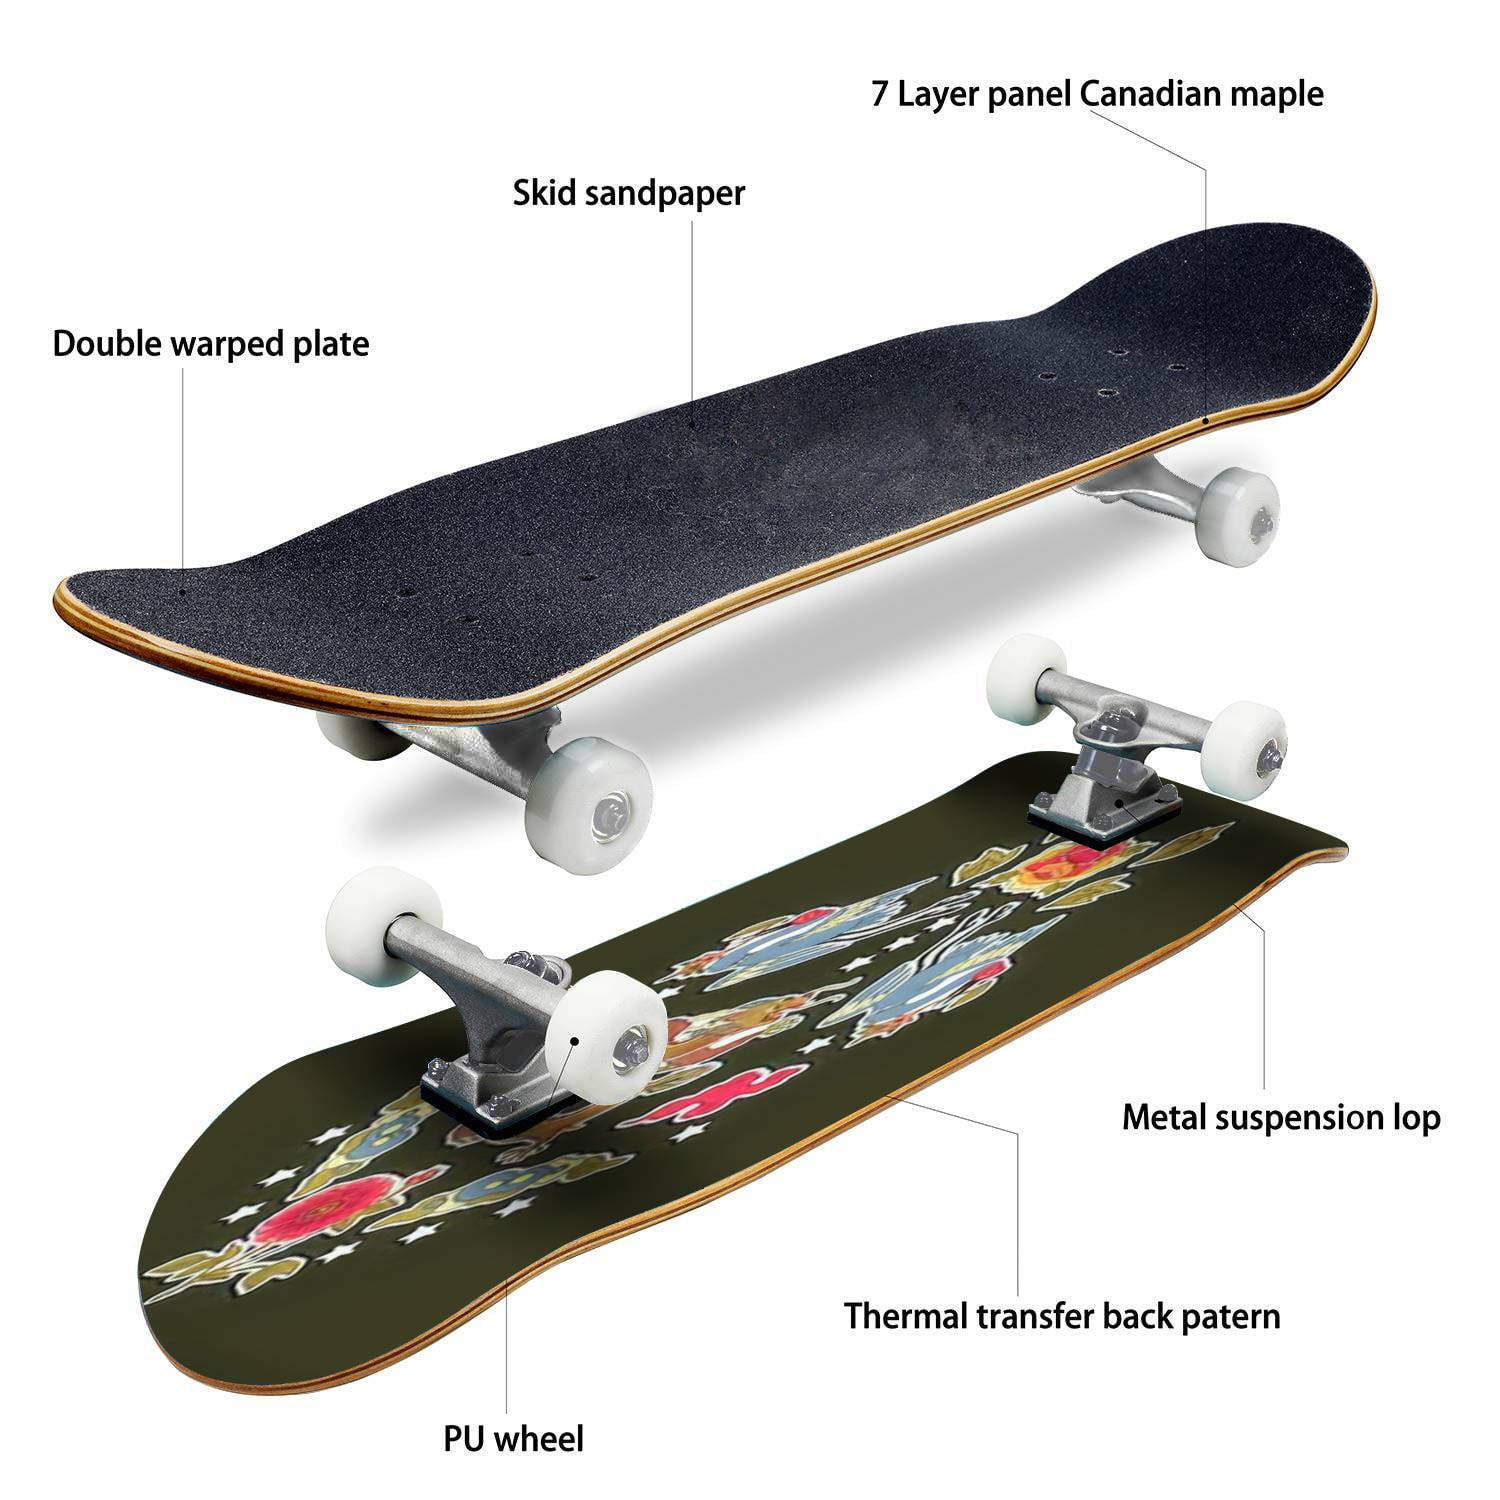 Gold Indigo Malachite Marble Outdoor Skateboard 31x8 Pro Complete Skate Board Cruiser 8 Layers Double Kick Concave Deck Maple Longboards for Youths Sports 